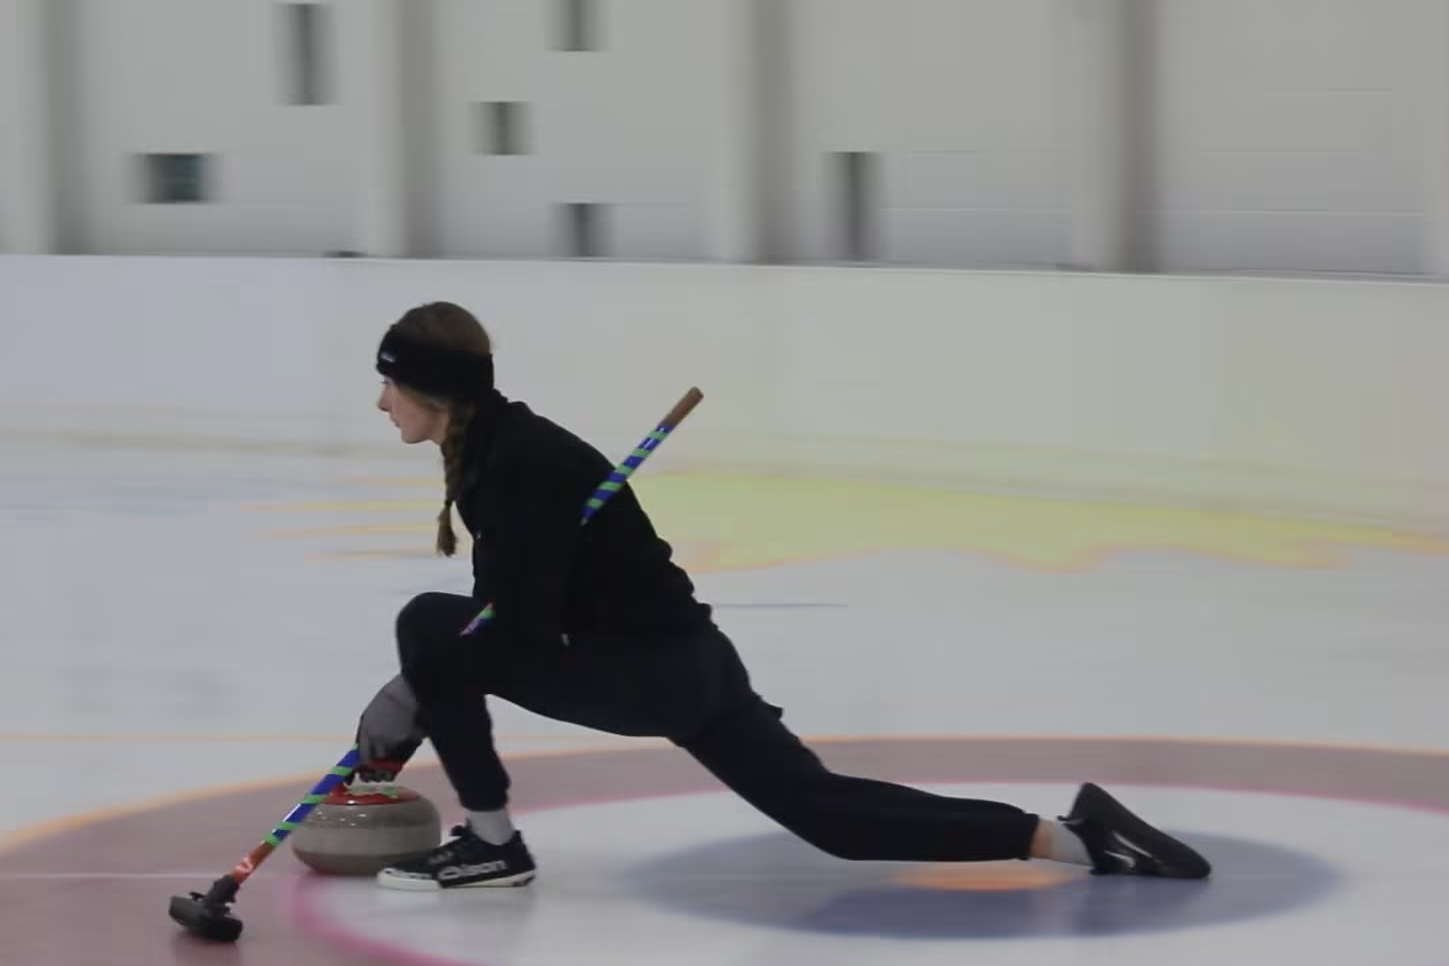 SU students participate in intramural curling at the Tennity Ice Pavilion.